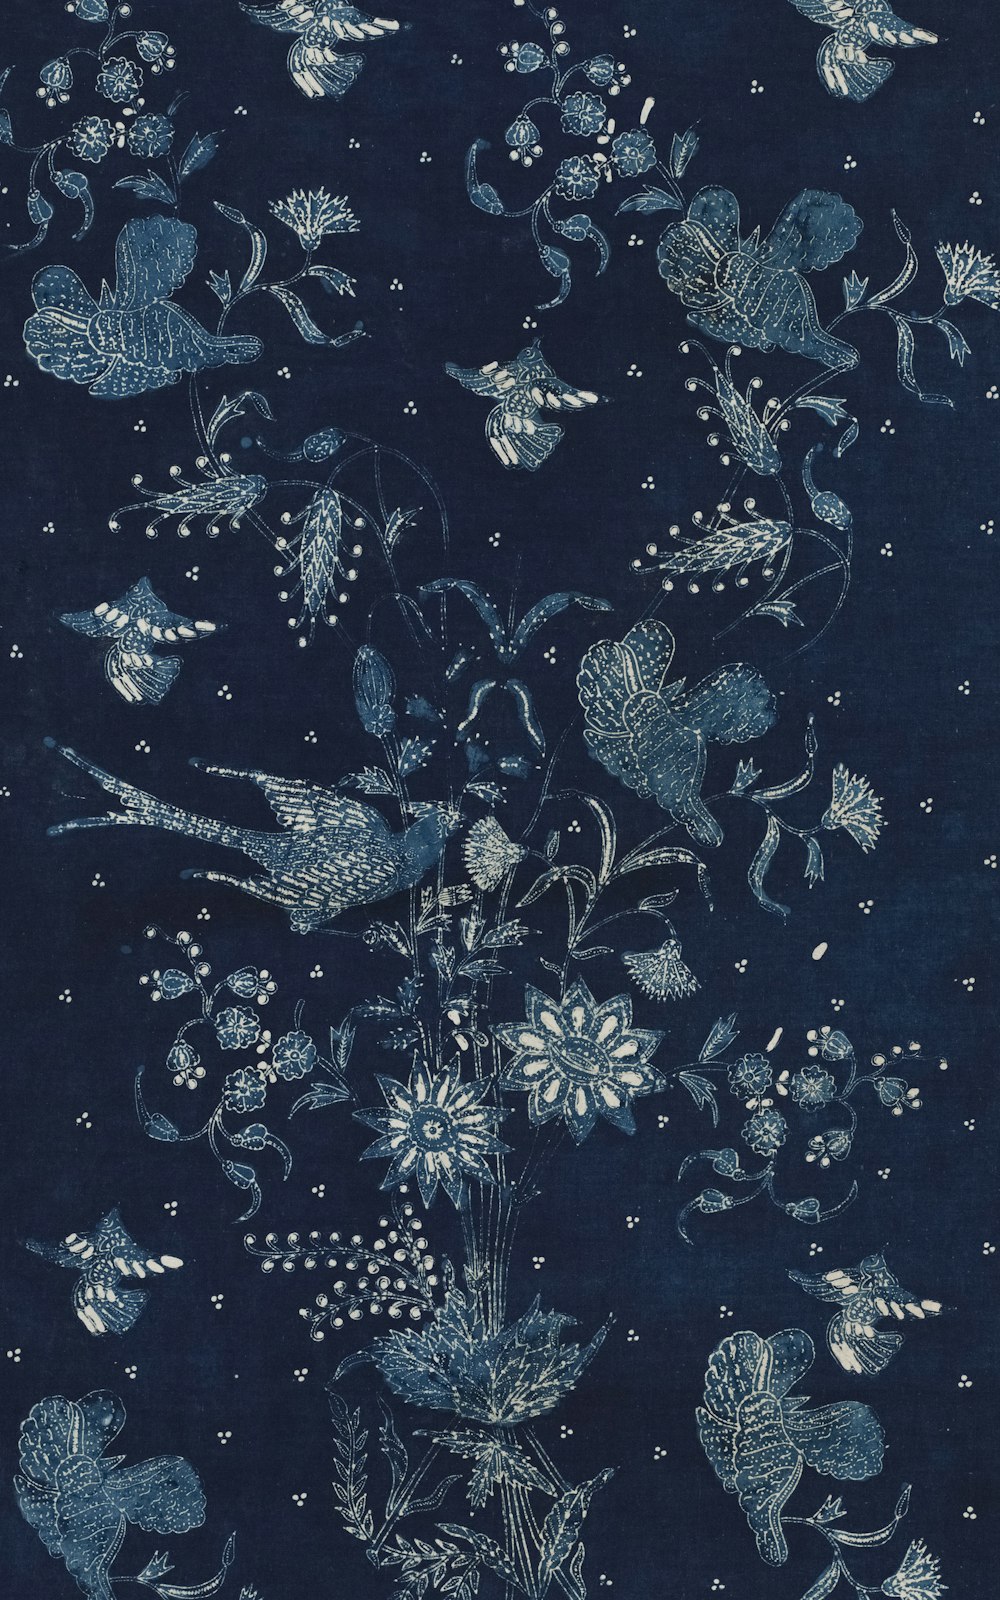 a painting of flowers and birds on a blue background